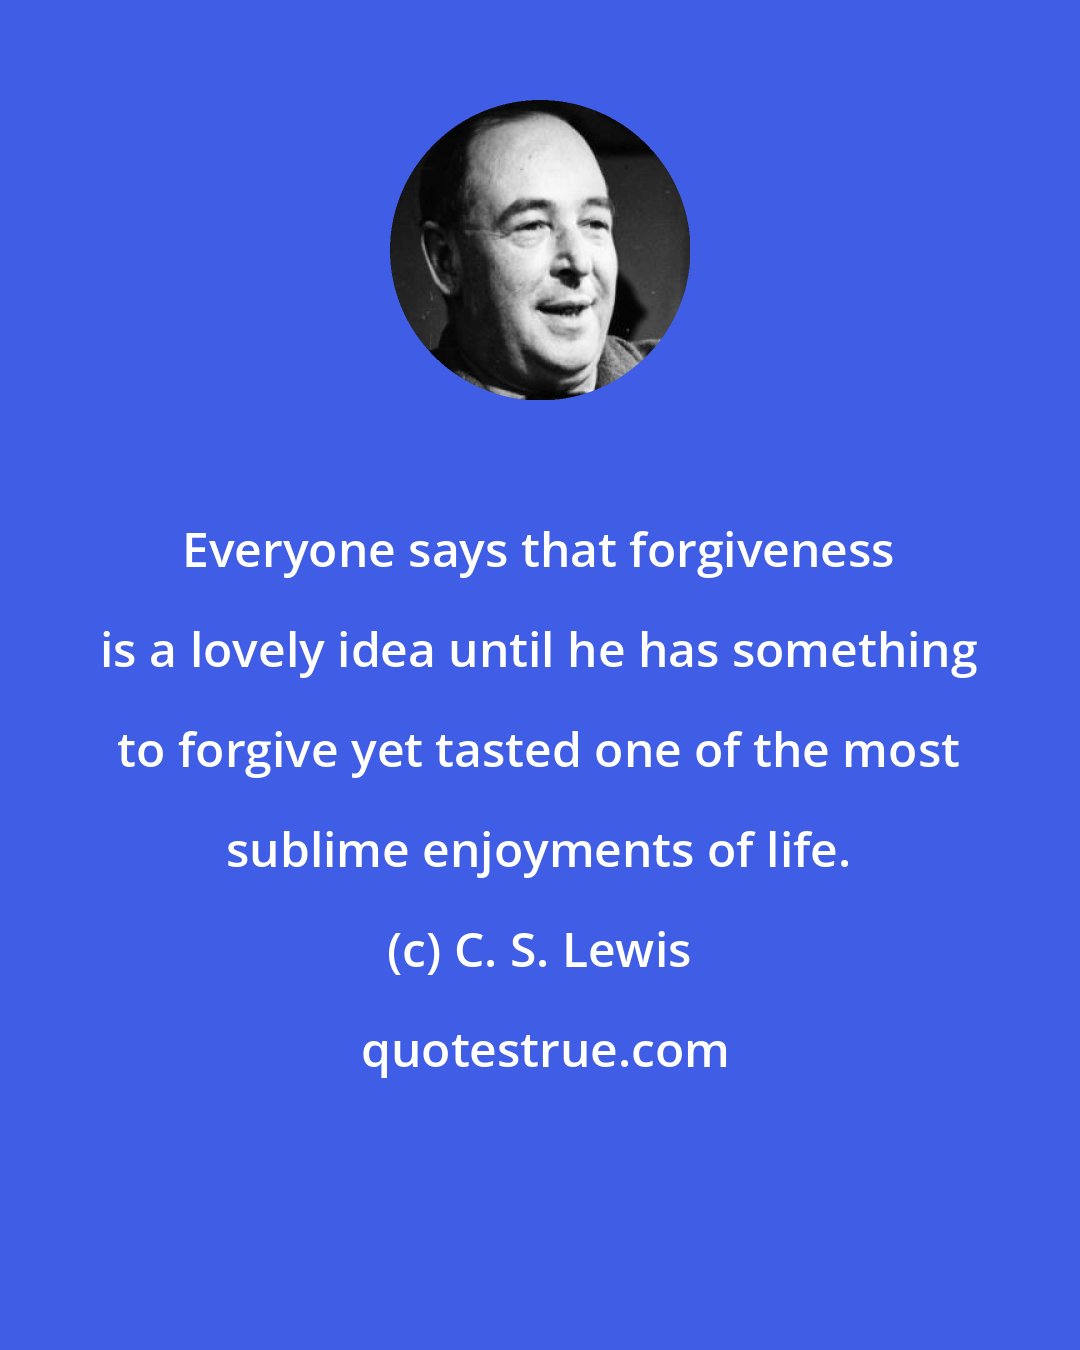 C. S. Lewis: Everyone says that forgiveness is a lovely idea until he has something to forgive yet tasted one of the most sublime enjoyments of life.